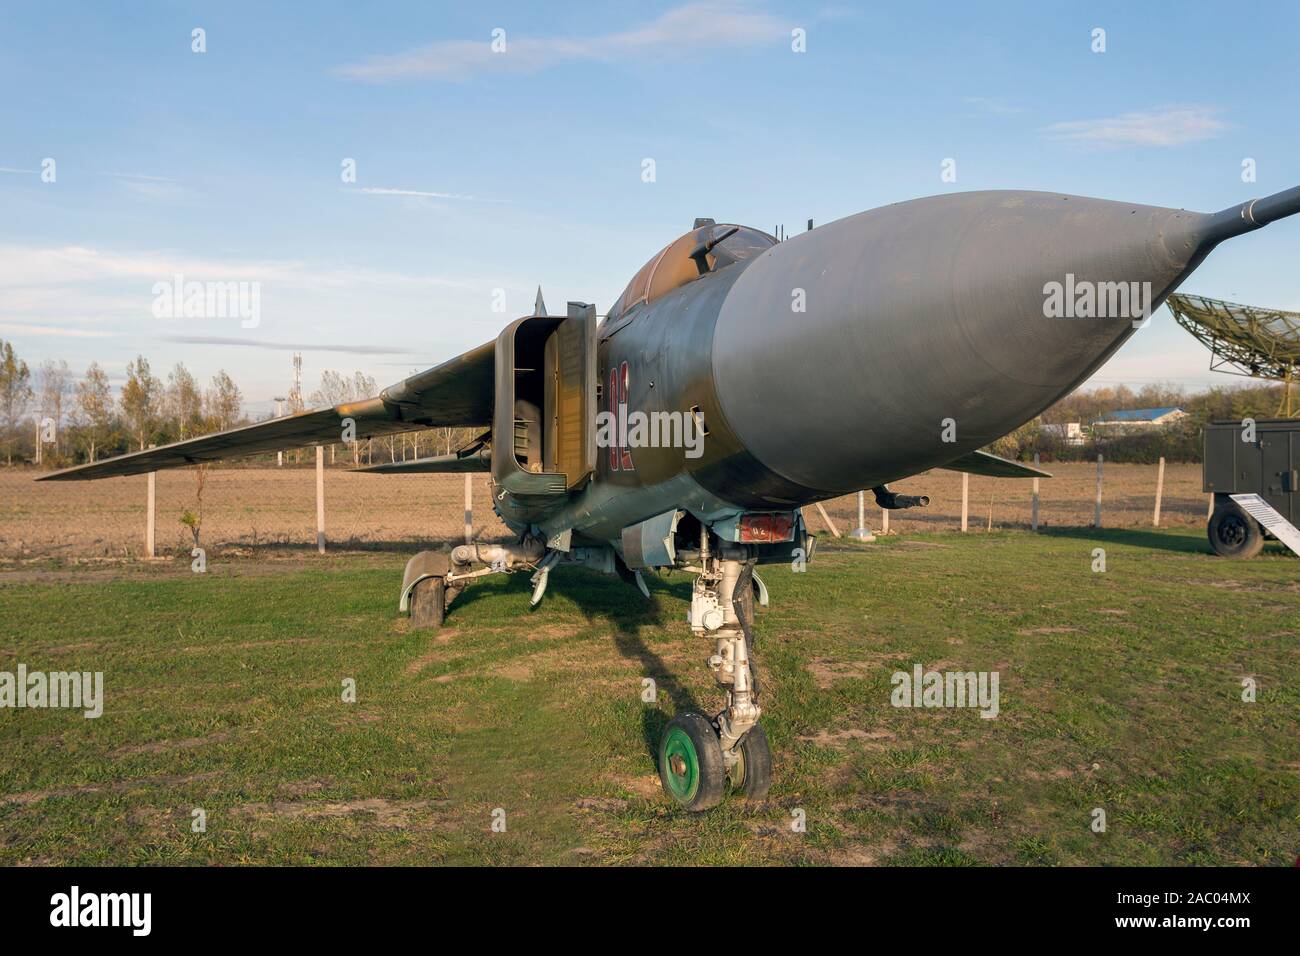 Old russian Mig-23 fighter jet in a military museum in Hungary. Stock Photo